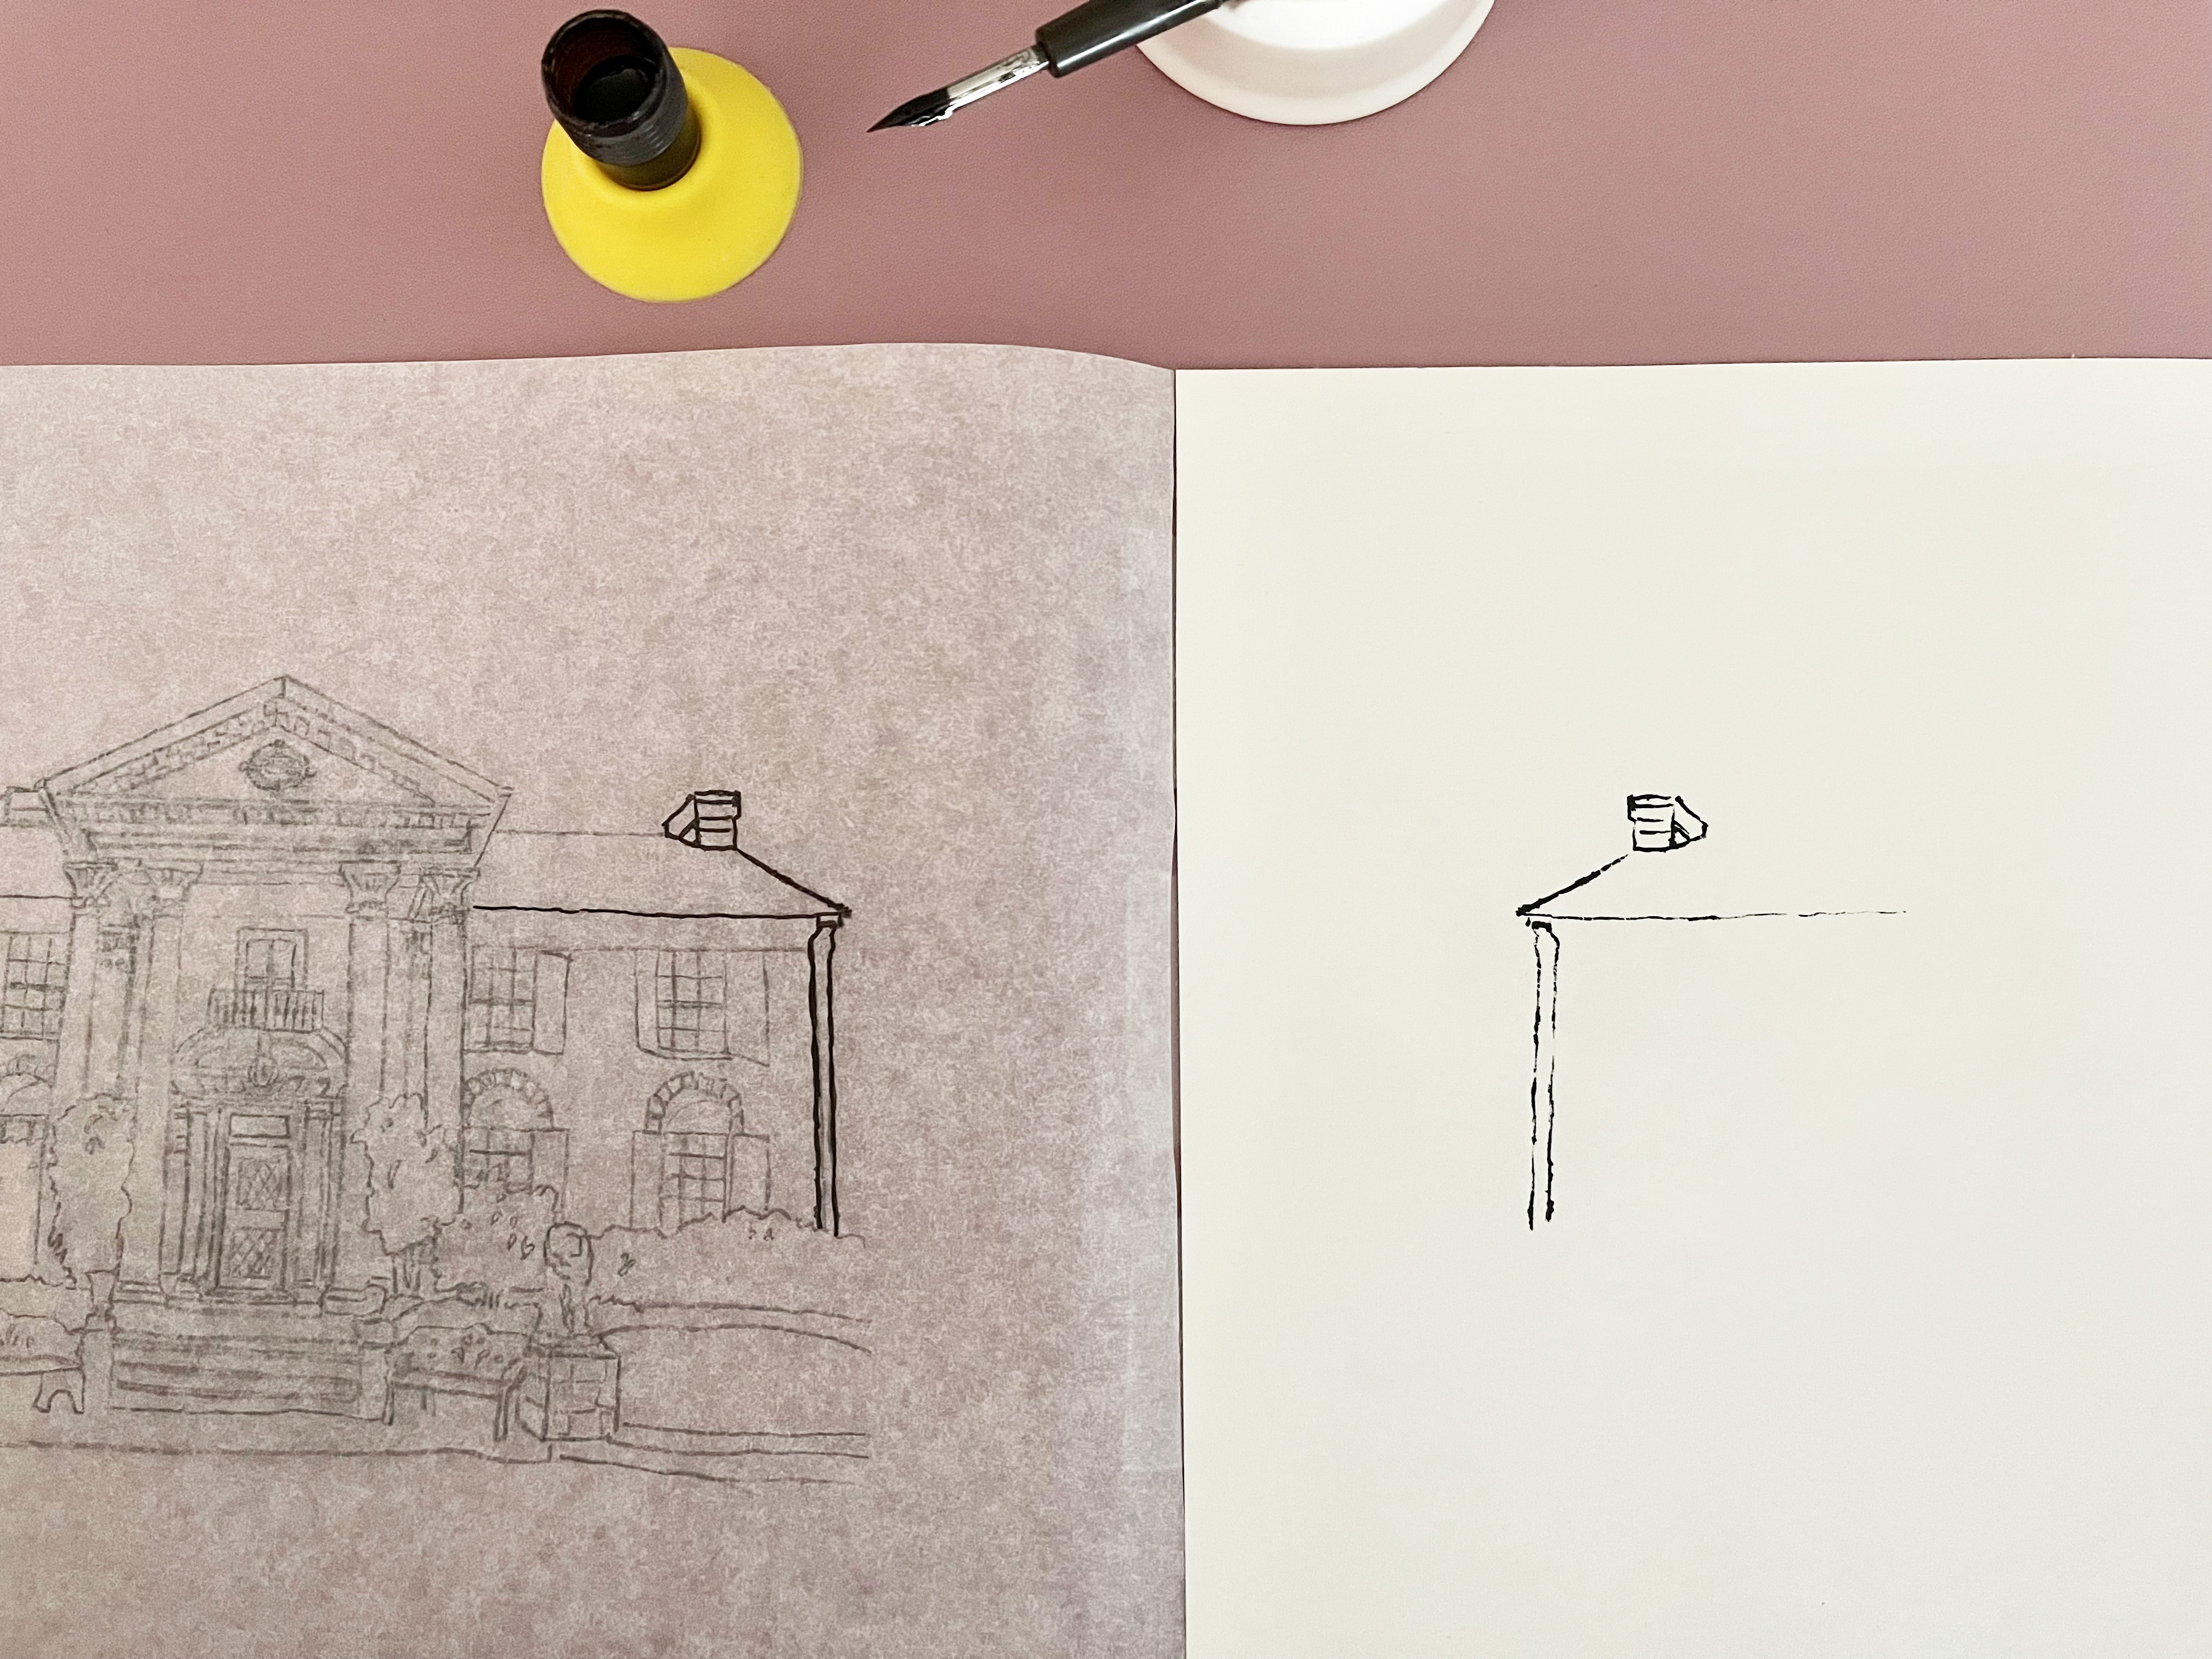 How to Make a Blotted Line Art Drawing